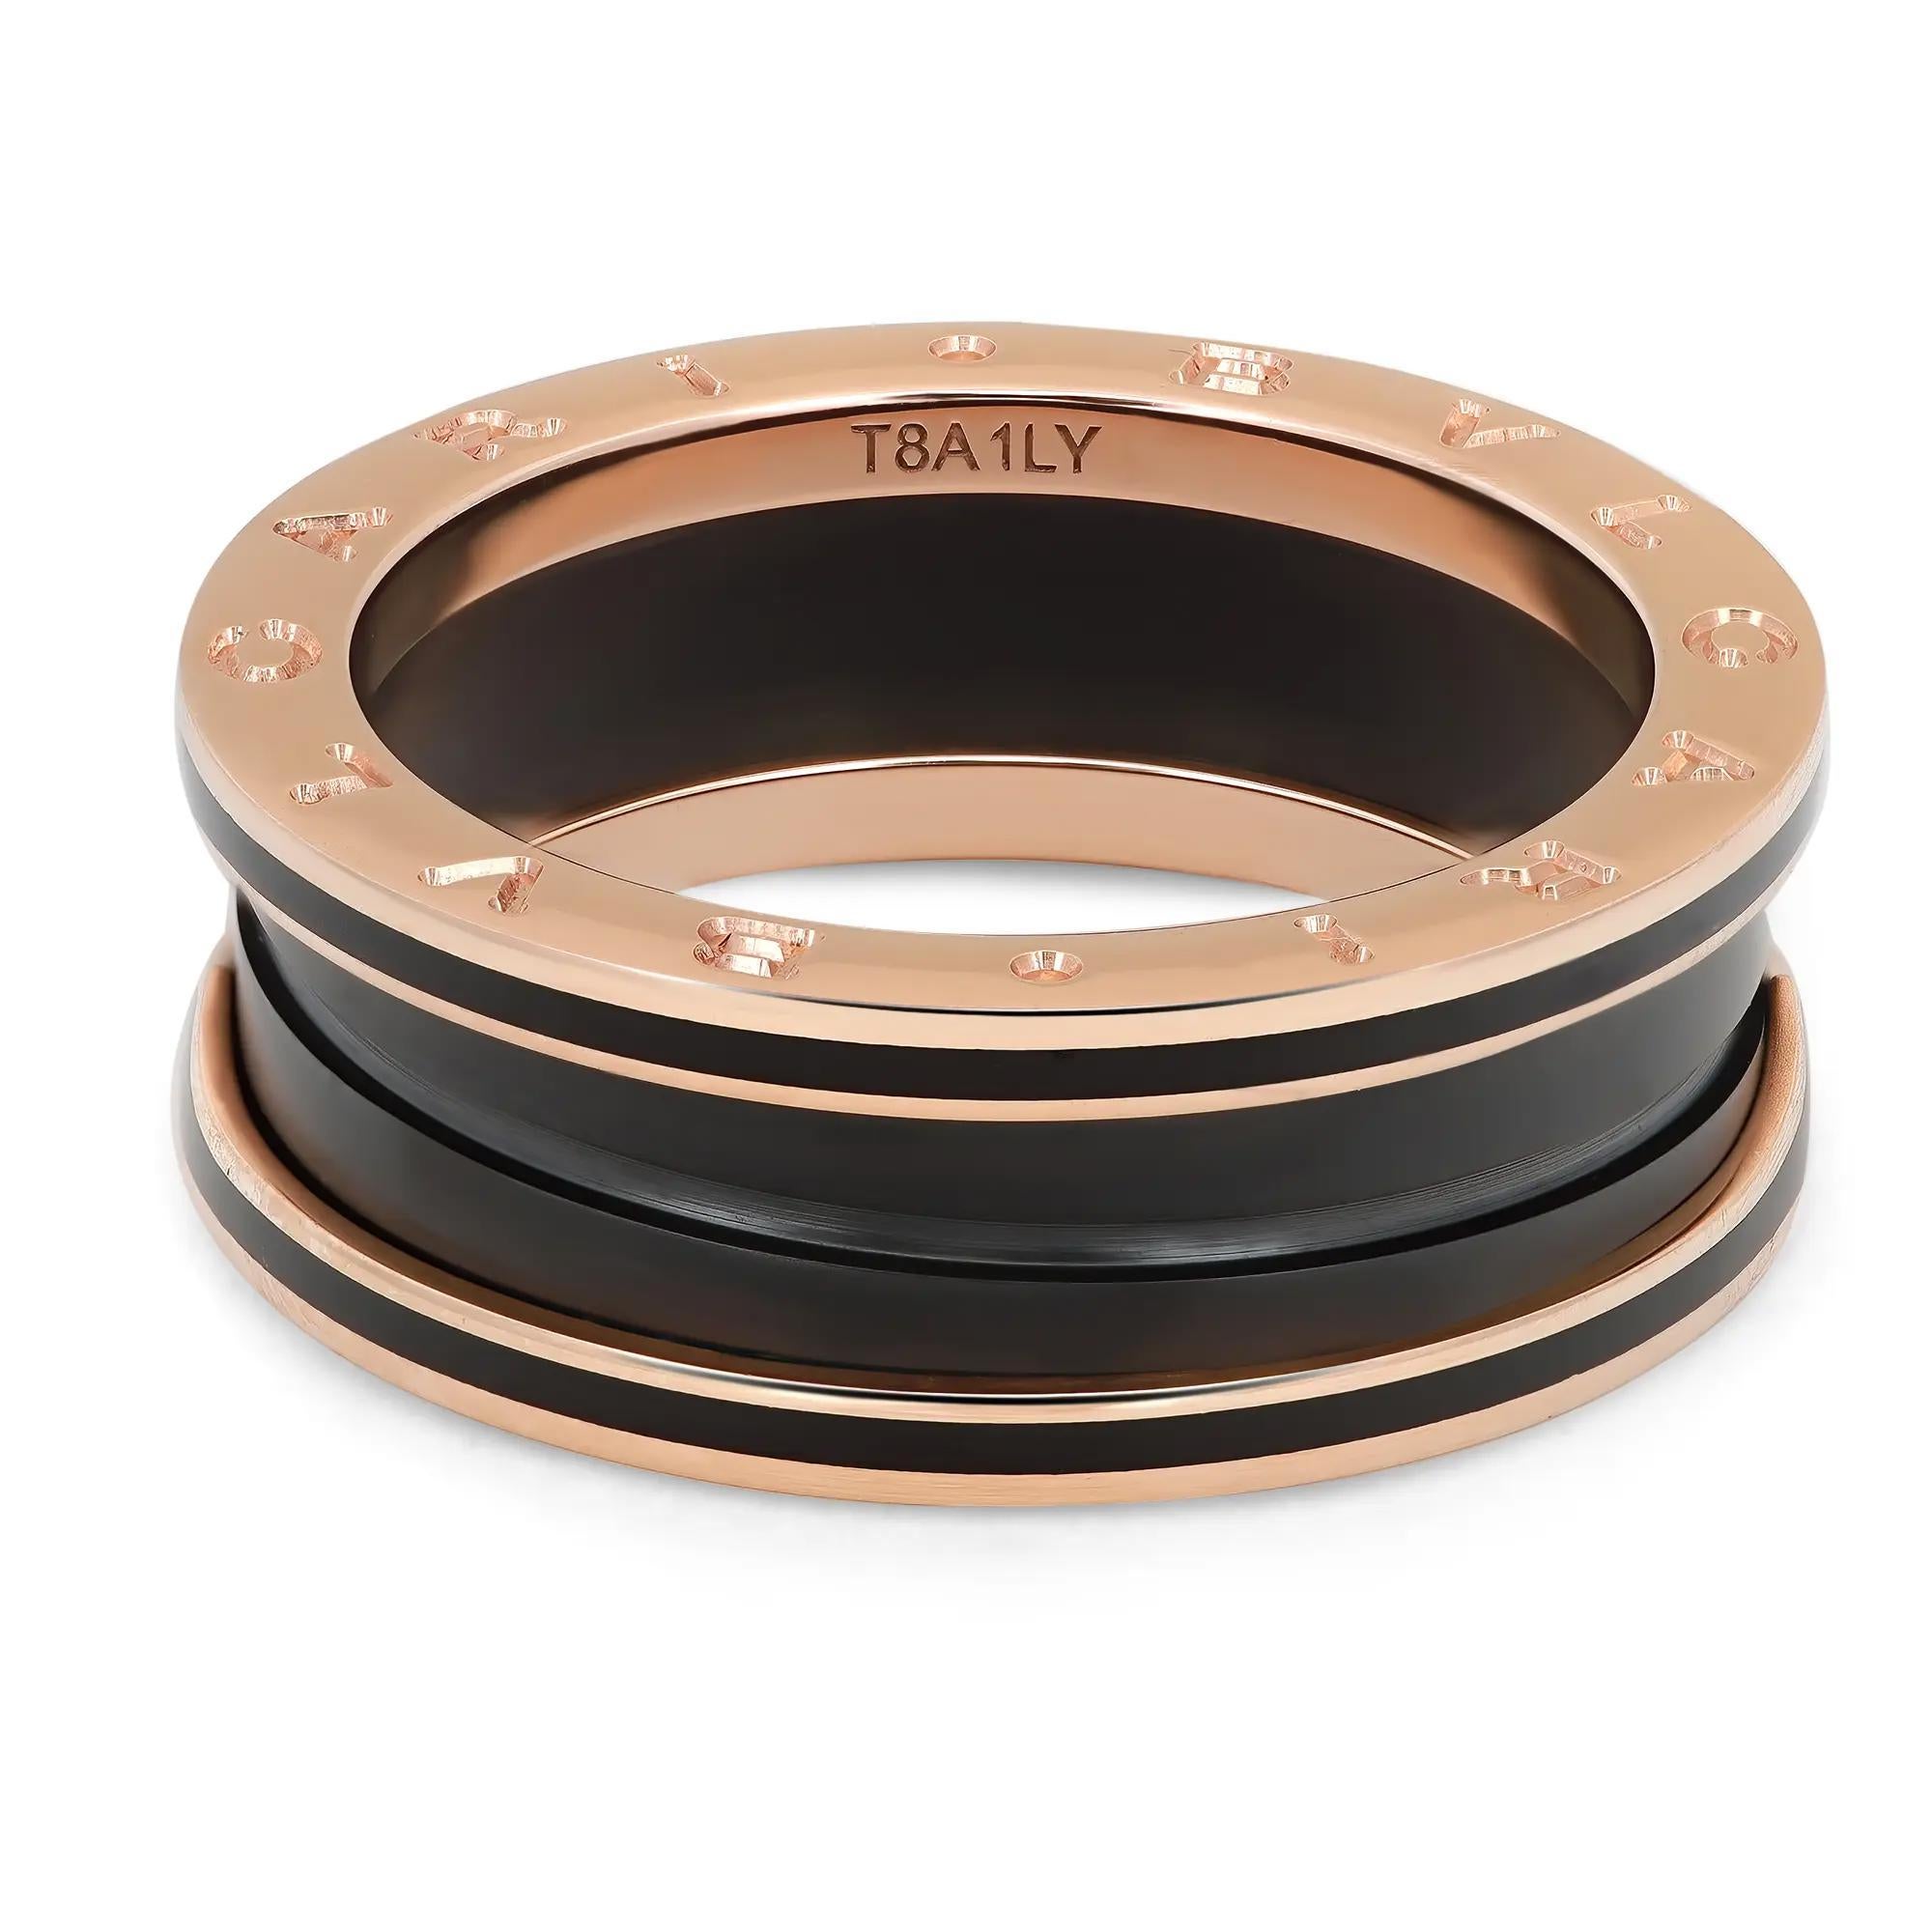 Bold and chic, this Bvlgari ring is a perfect addition to your statement jewelry collection. Crafted in lustrous 18K rose gold. It features a two-band B.zero1 ring with all matt black ceramic in the center and logo engraved rose gold outer rims.